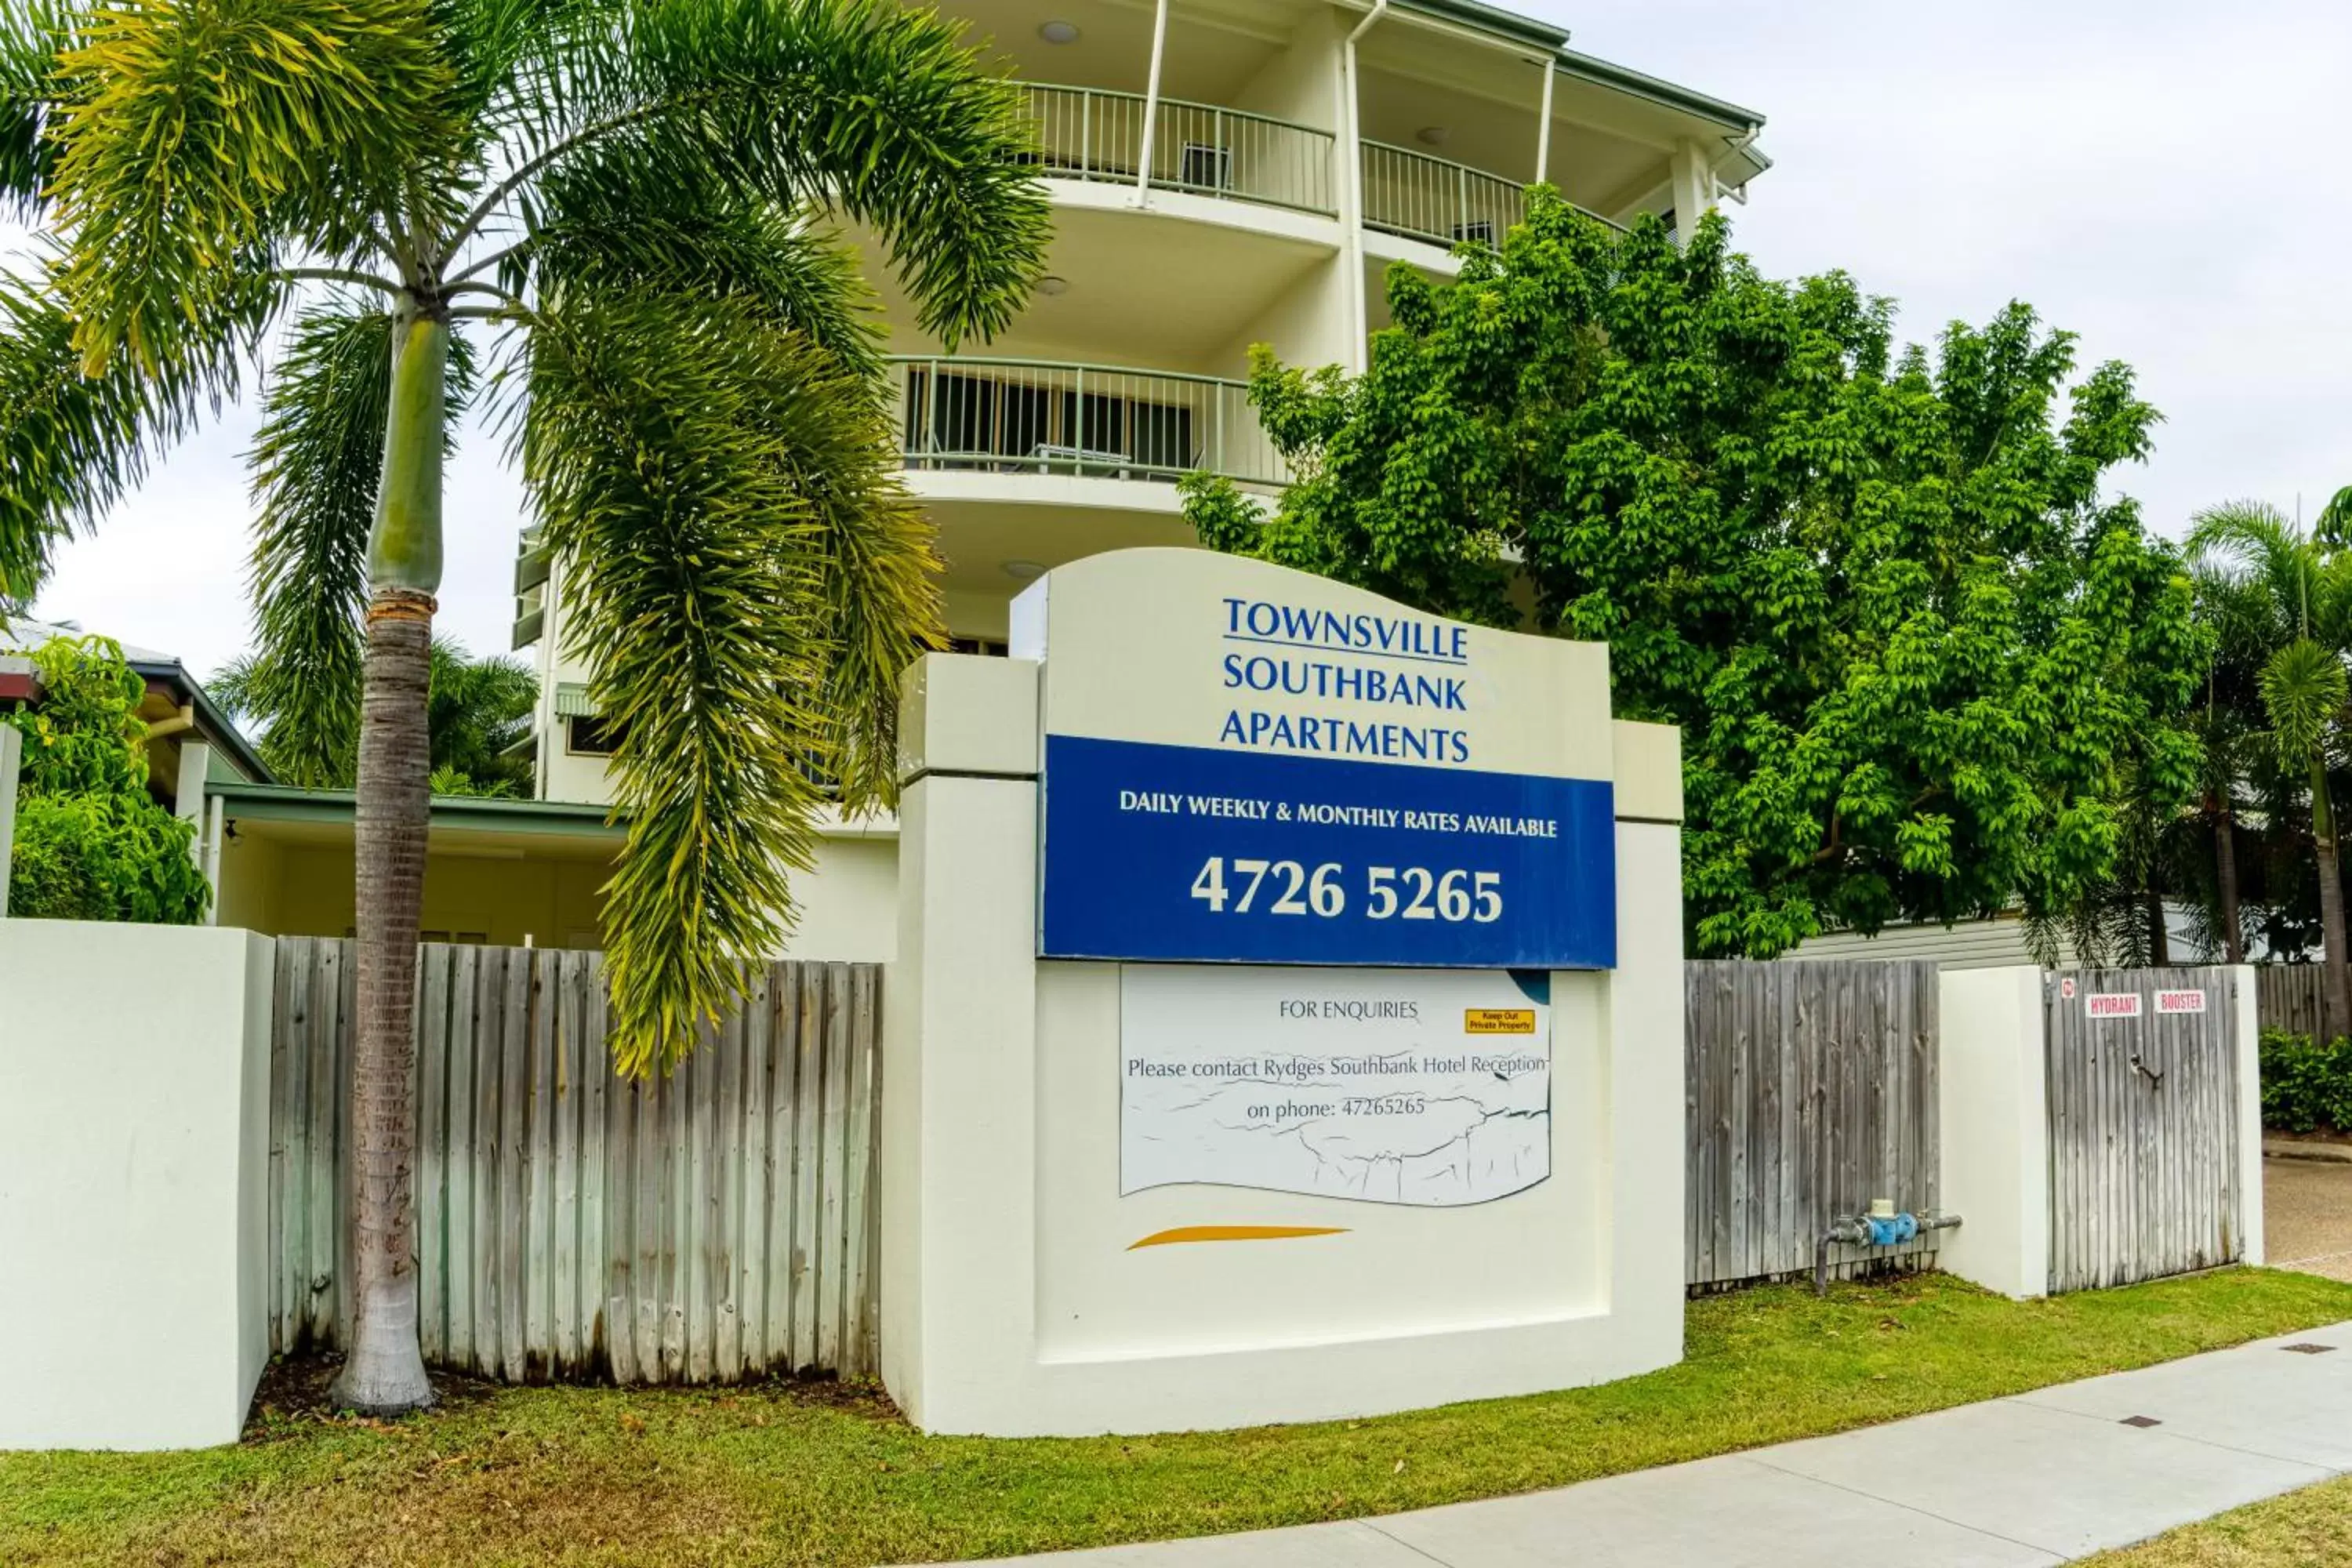 Property Building in Townsville Southbank Apartments